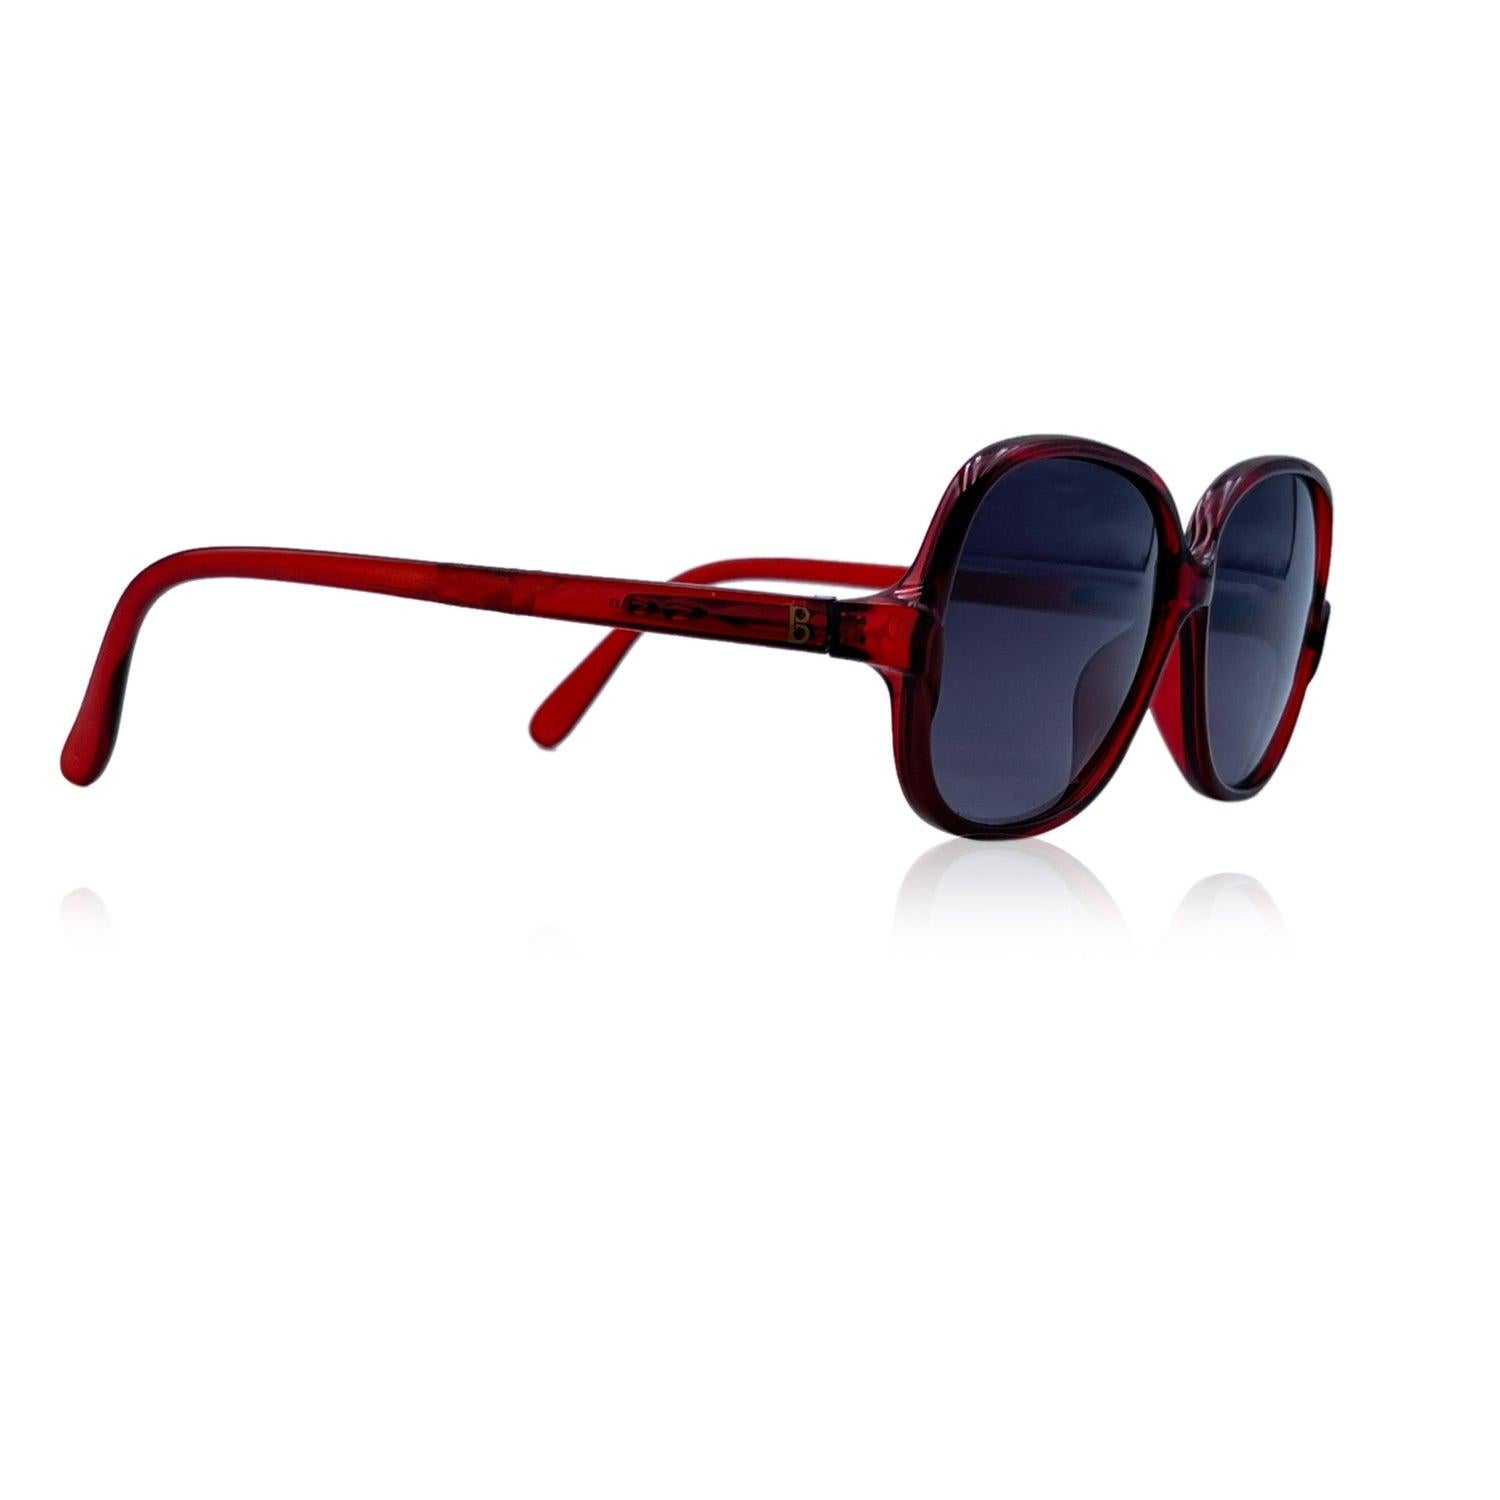 Vintage sunglasses by Terri Brogan, mod. 8635 - 52/11 . Red Optyl acetate frame with RAY-BAN signatures on temples. Square design. Gradient grey original lens. Made in Italy Details MATERIAL: Acetate COLOR: Red MODEL: 8635 GENDER: Unisex Adults